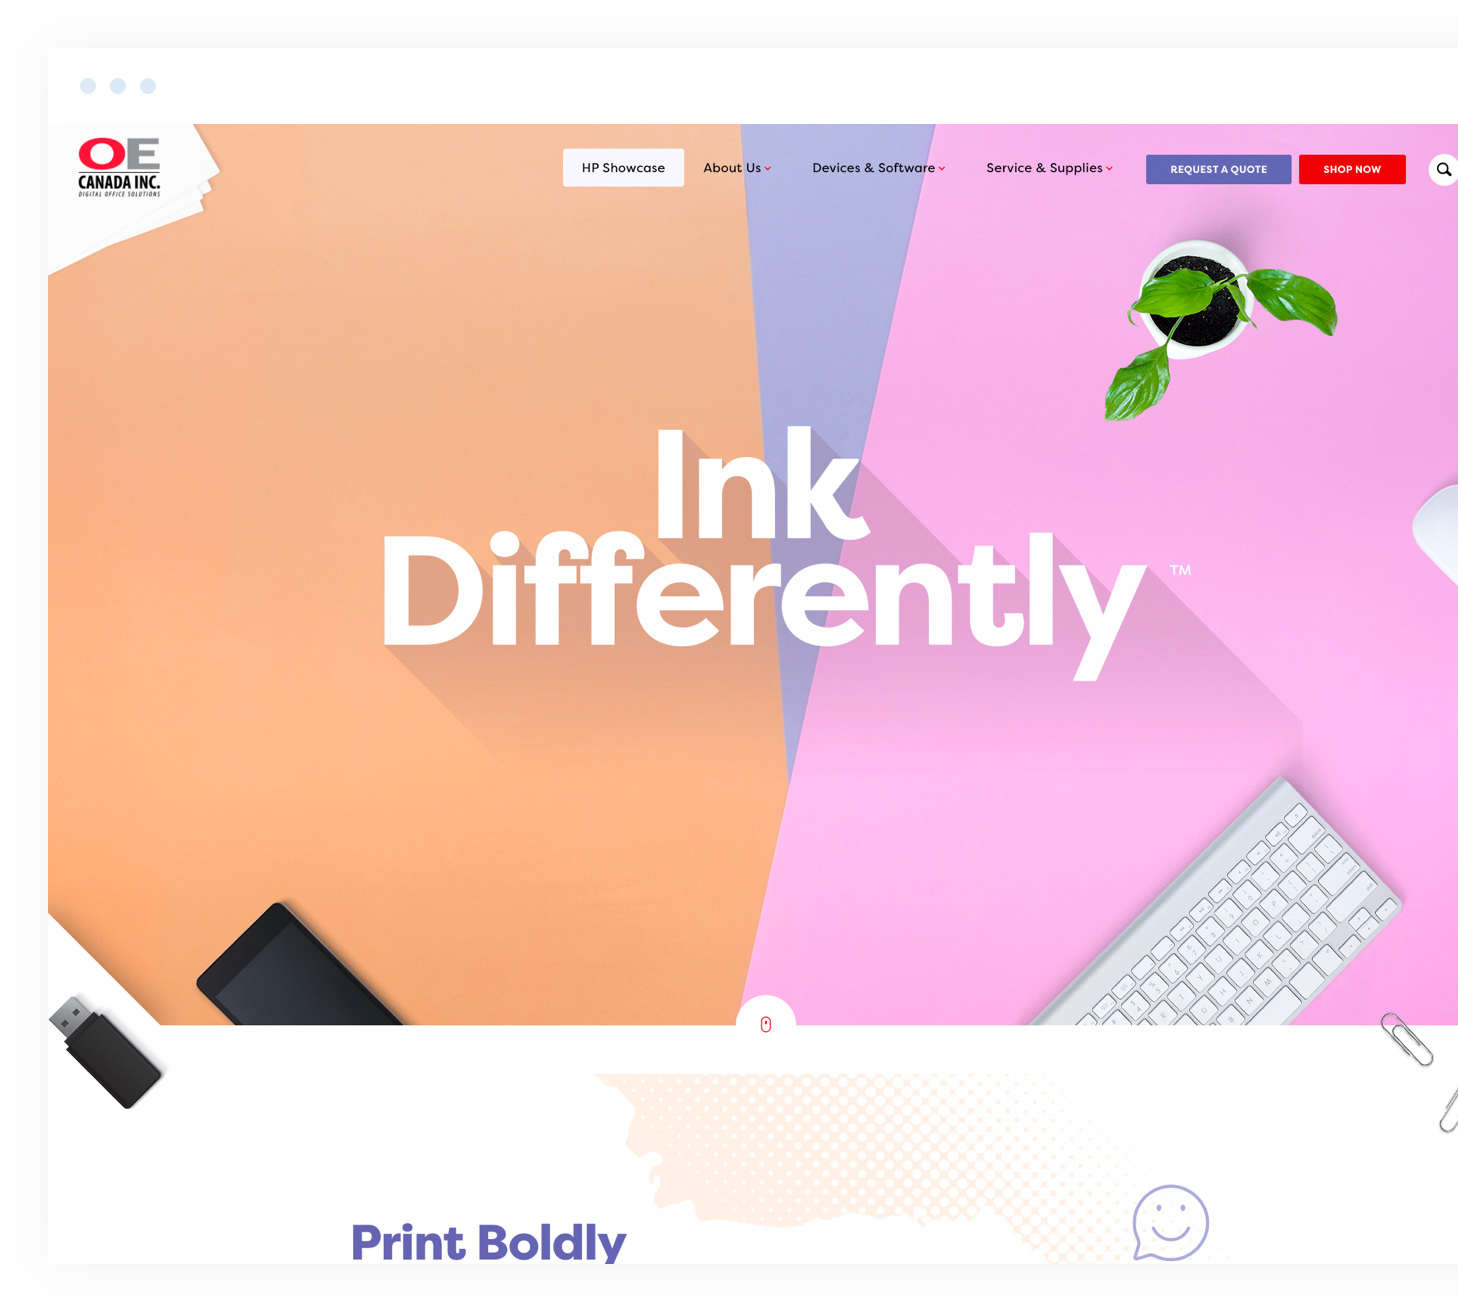 Ink differently home page loaded on a desktop browser